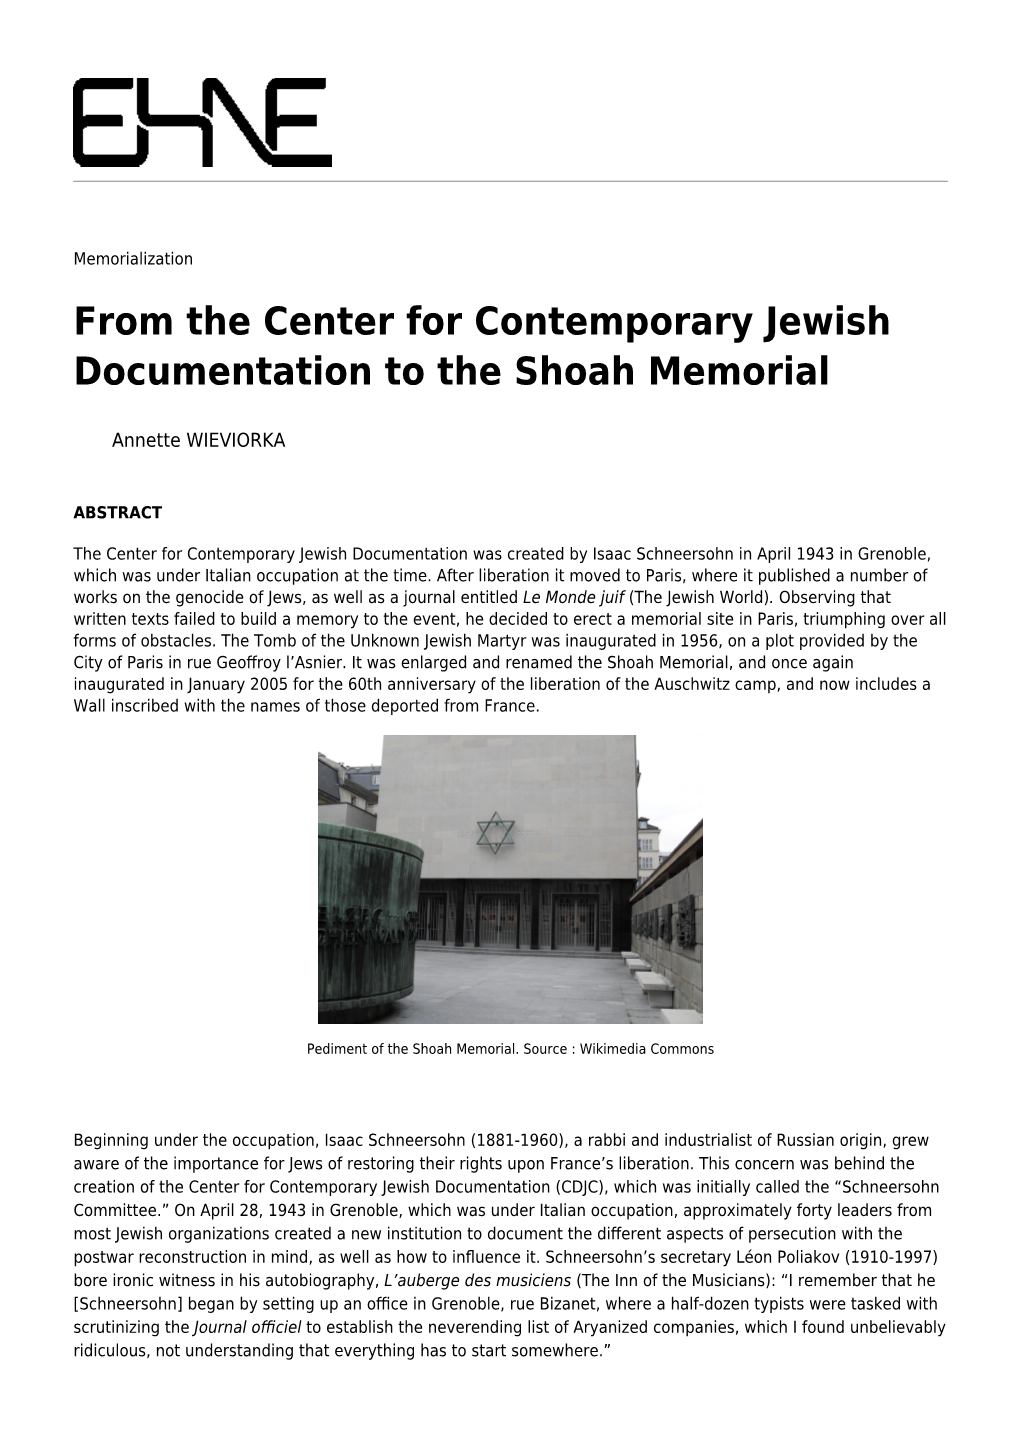 From the Center for Contemporary Jewish Documentation to the Shoah Memorial